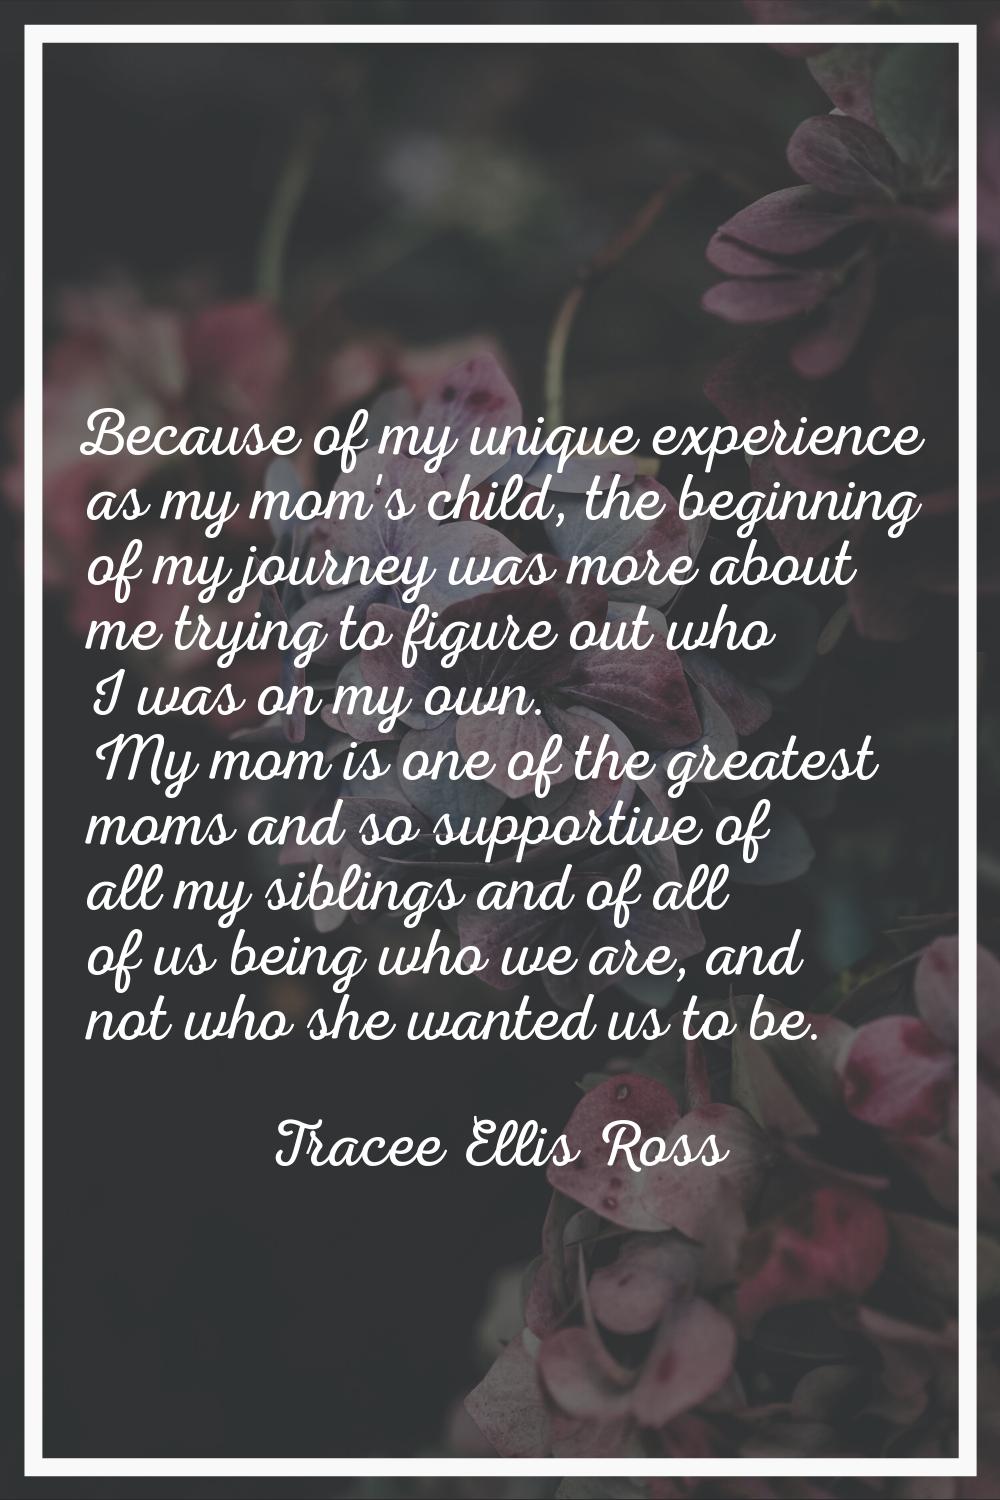 Because of my unique experience as my mom's child, the beginning of my journey was more about me tr